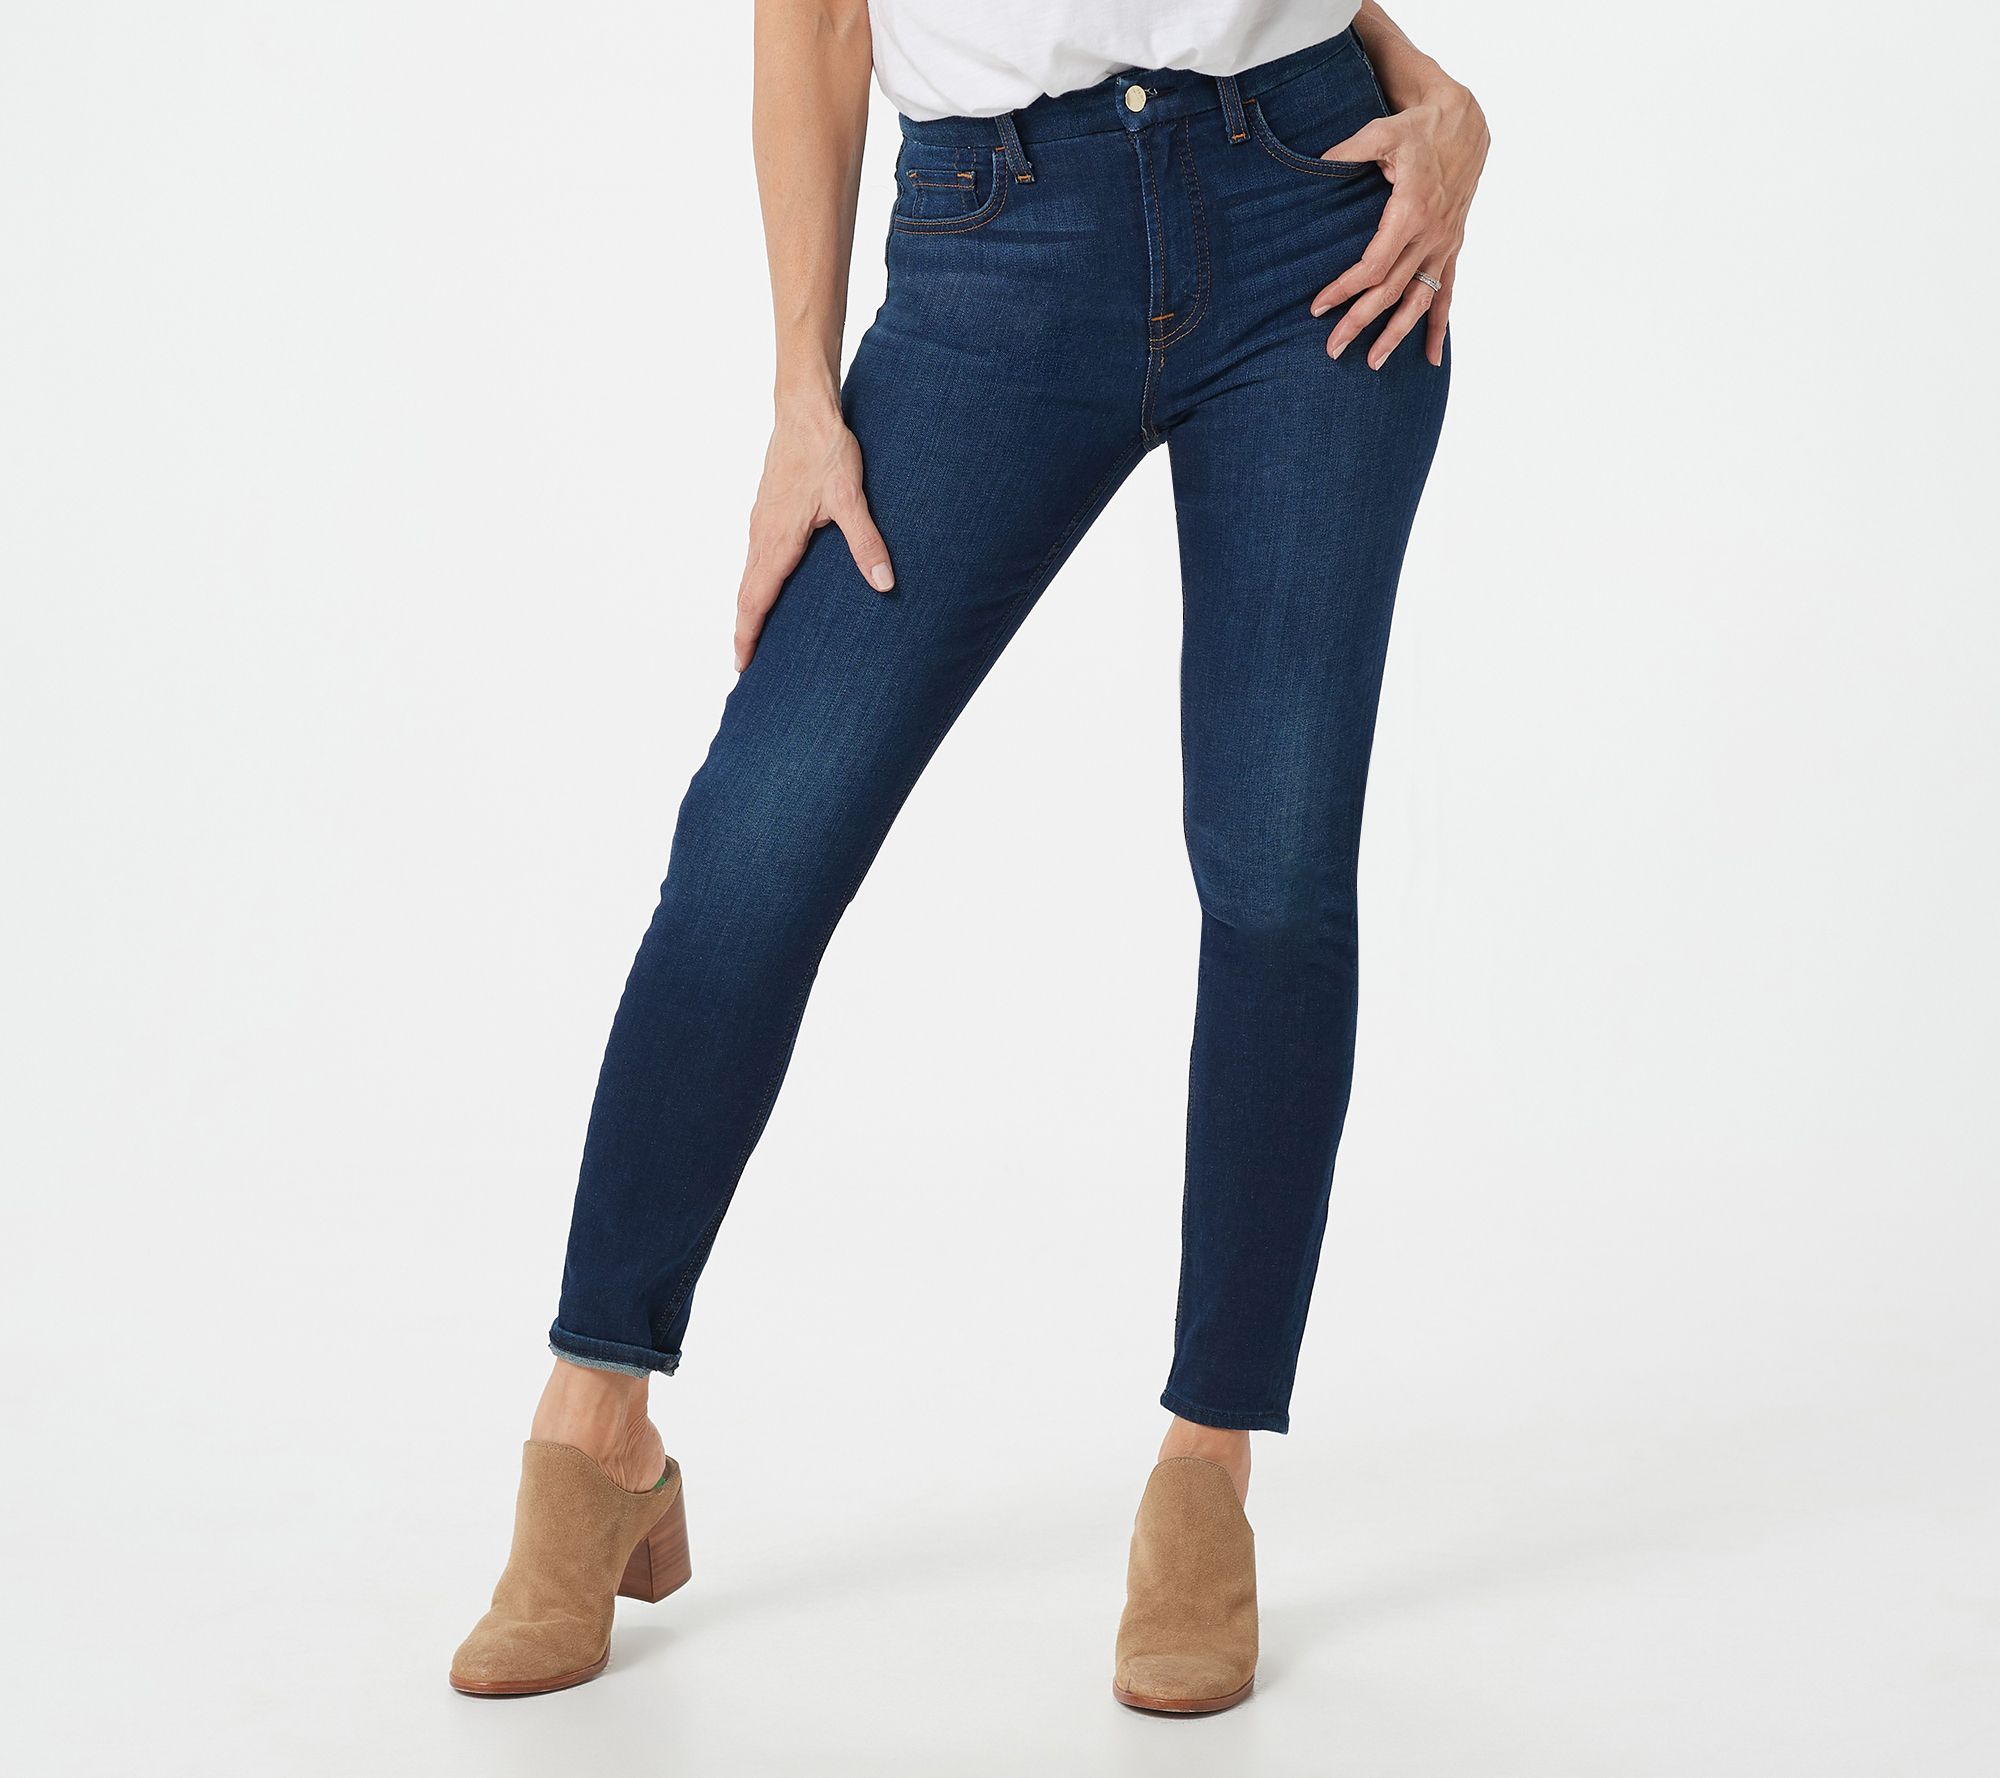 Jen7 by 7 for All Mankind High-Waisted Skinny Jeans - Lexington - QVC.com